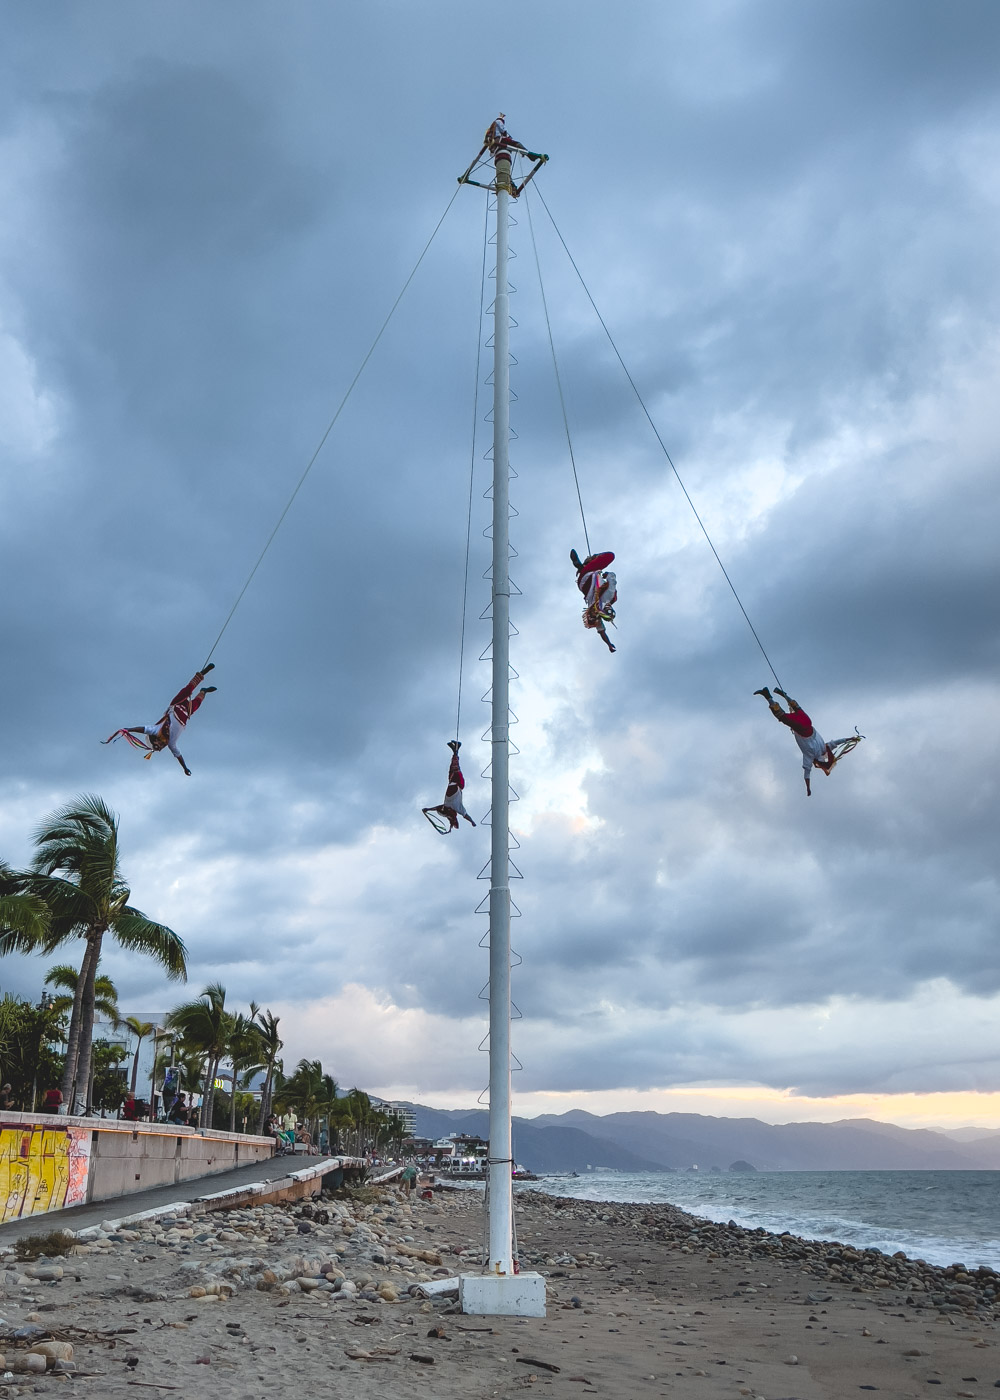 Four Papantla Flyers attached to a giant white pole on a beach.